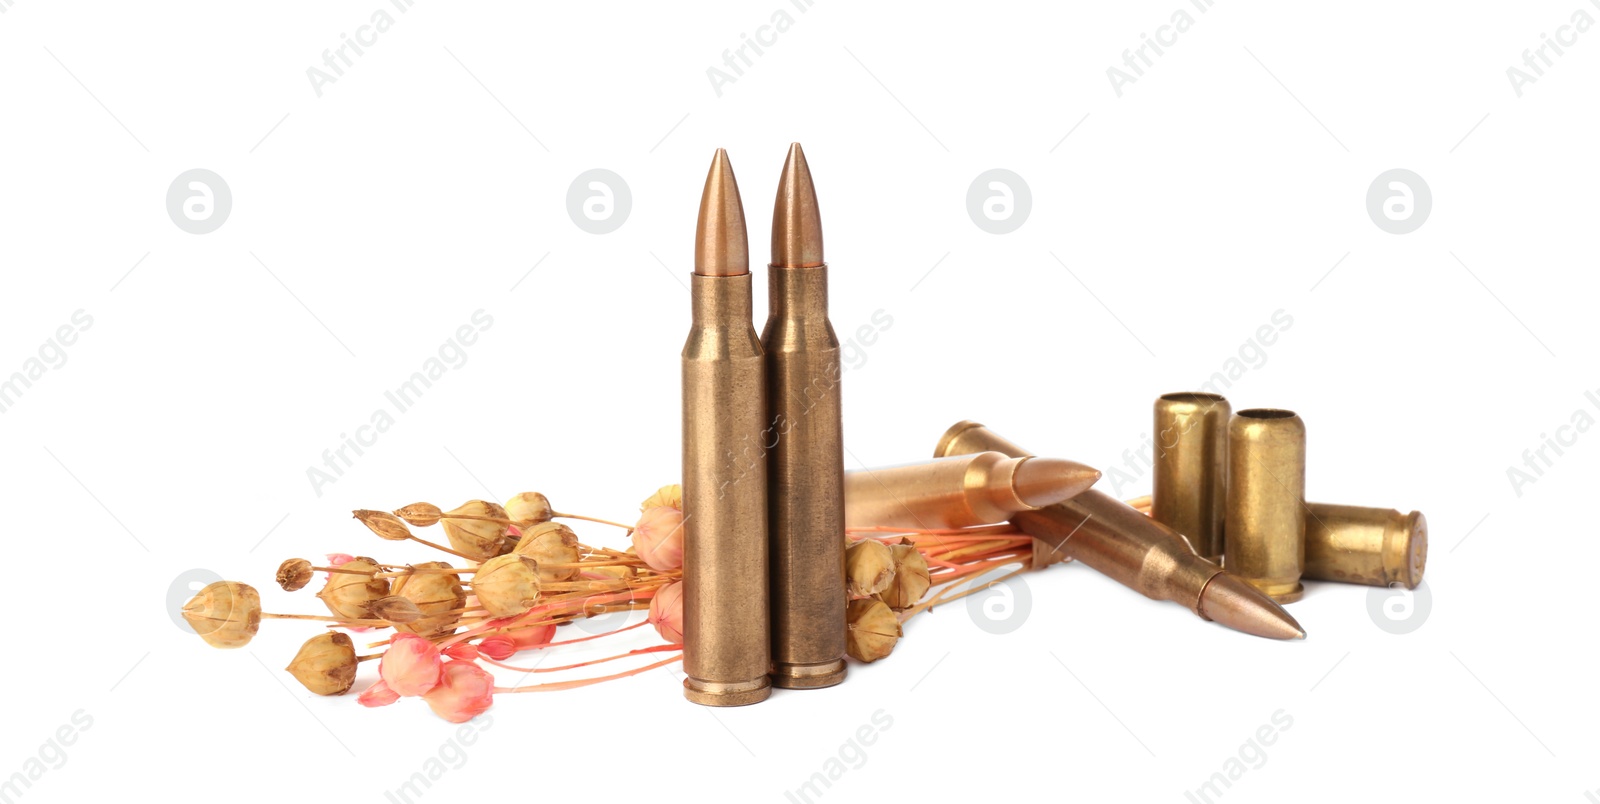 Photo of Bullets, cartridge cases and beautiful dry plant isolated on white